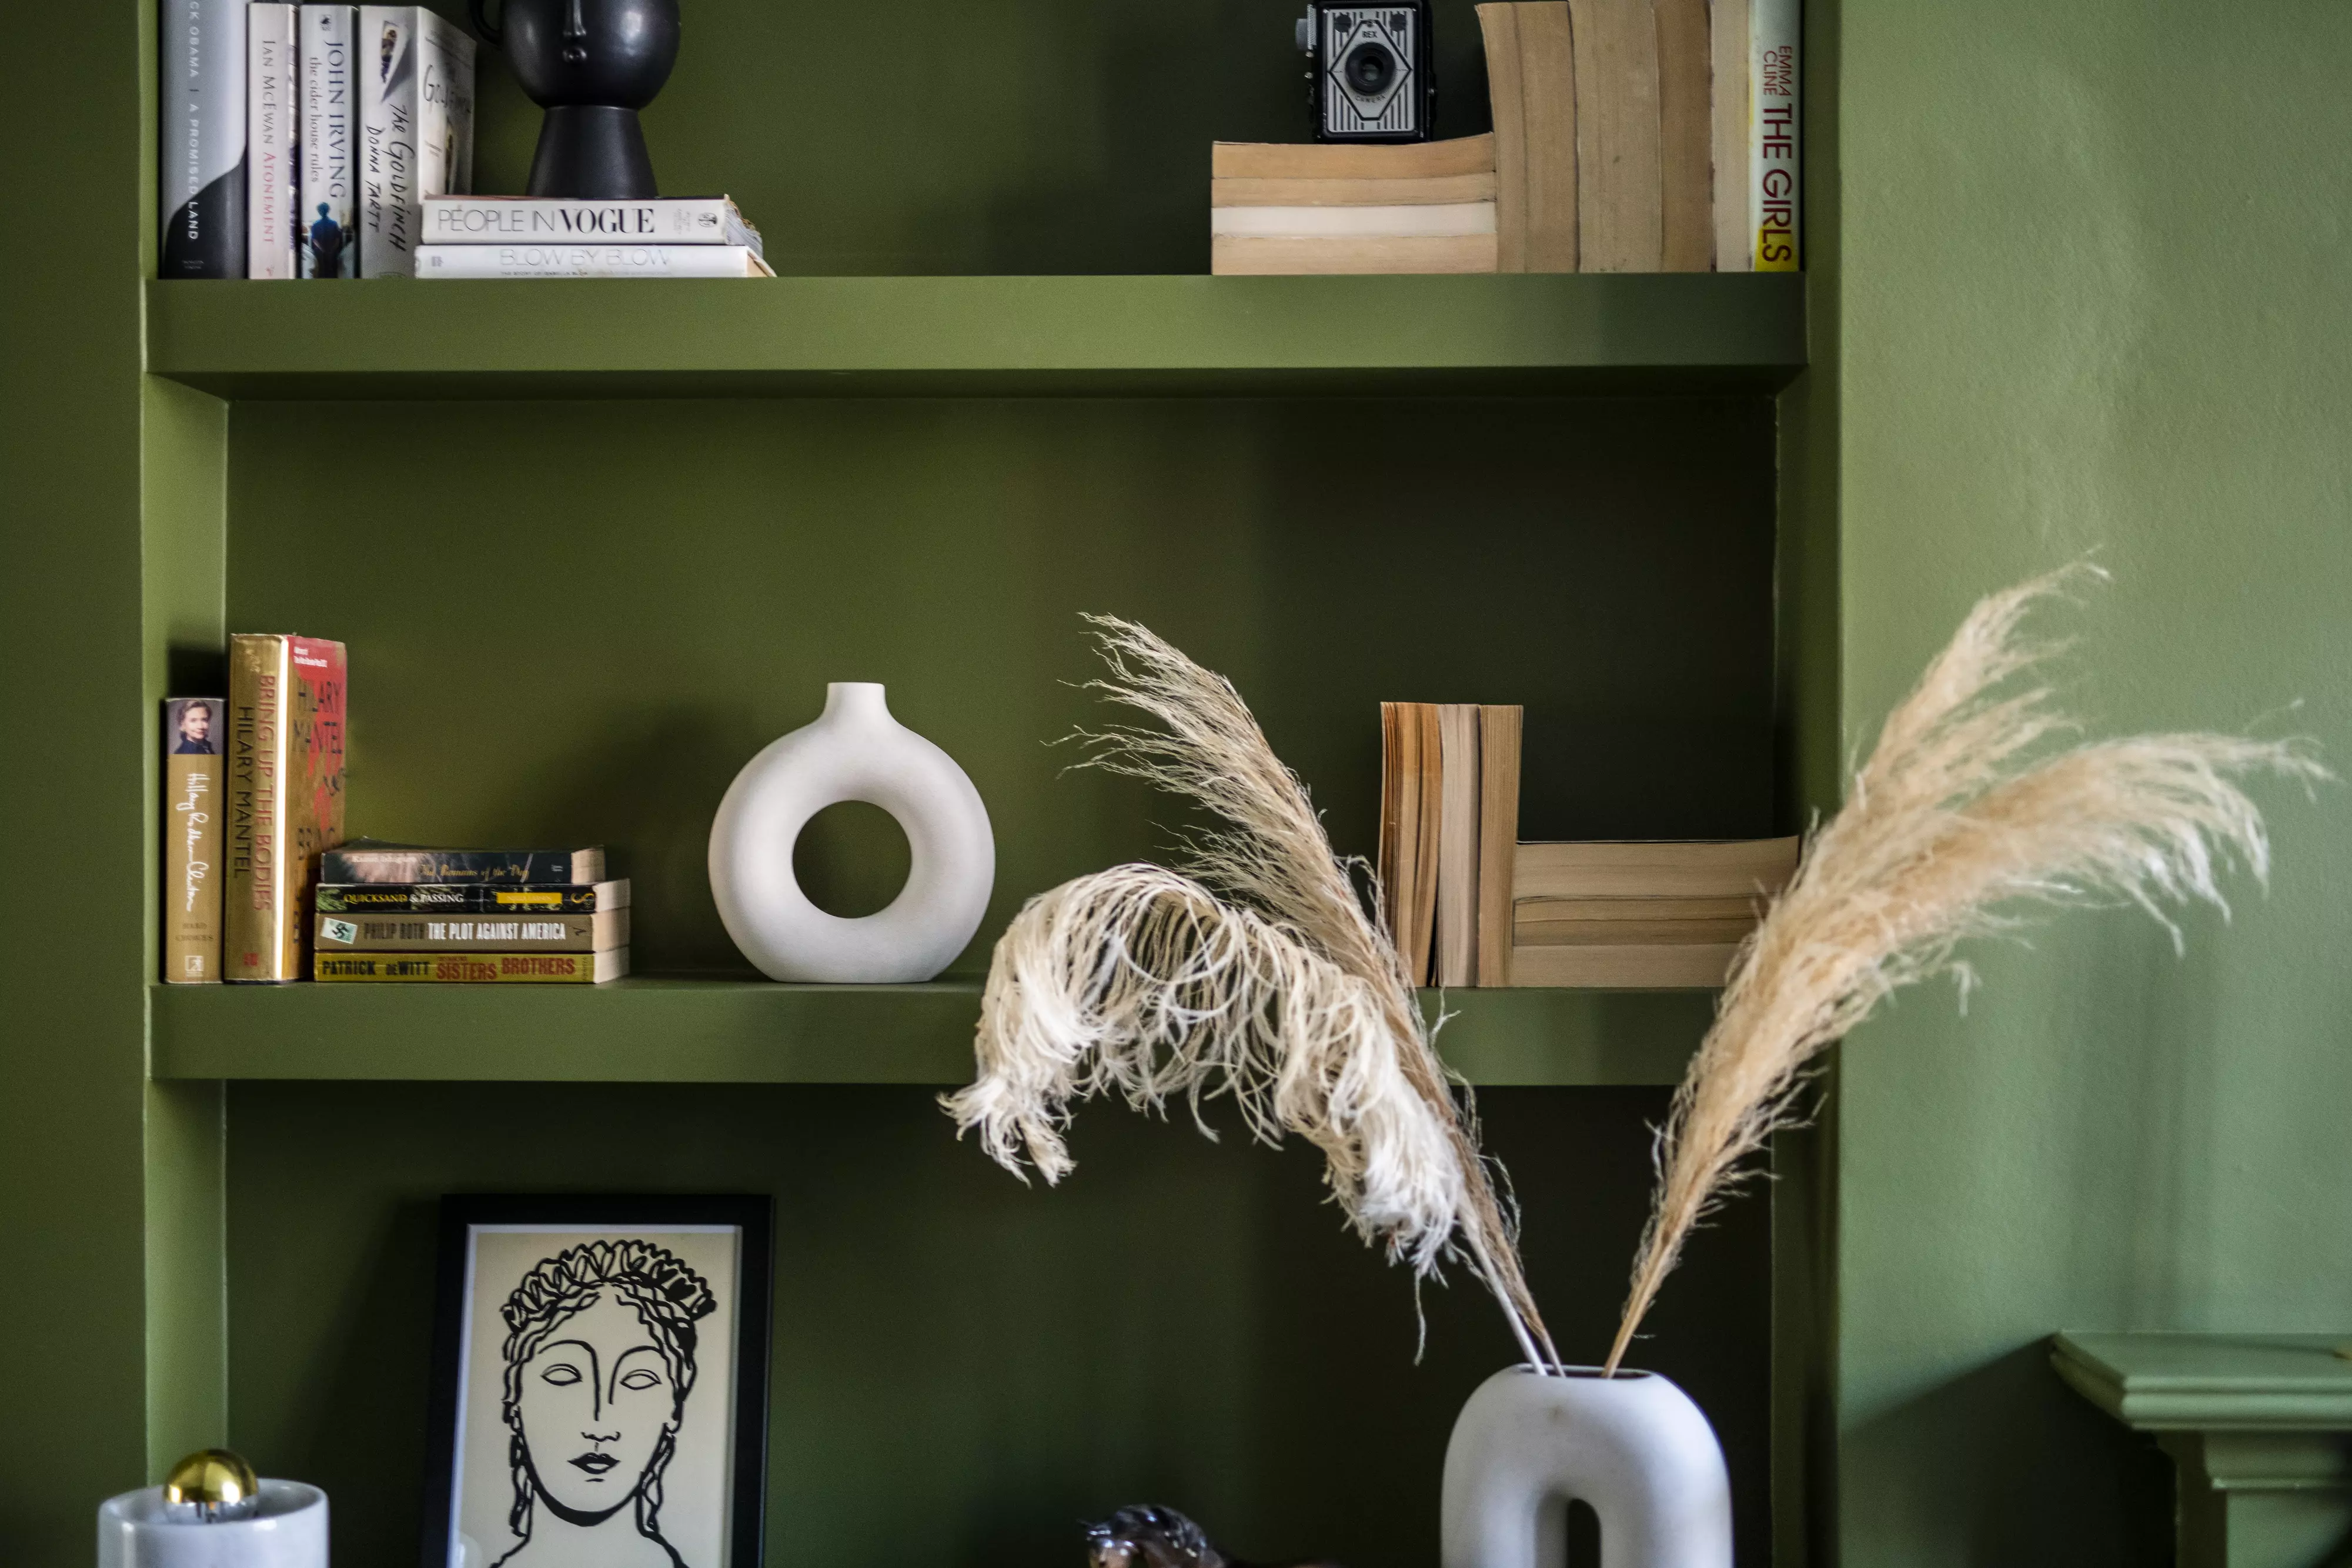 Home office shelf with books, decorative vases, and pampas grass against a green wall.